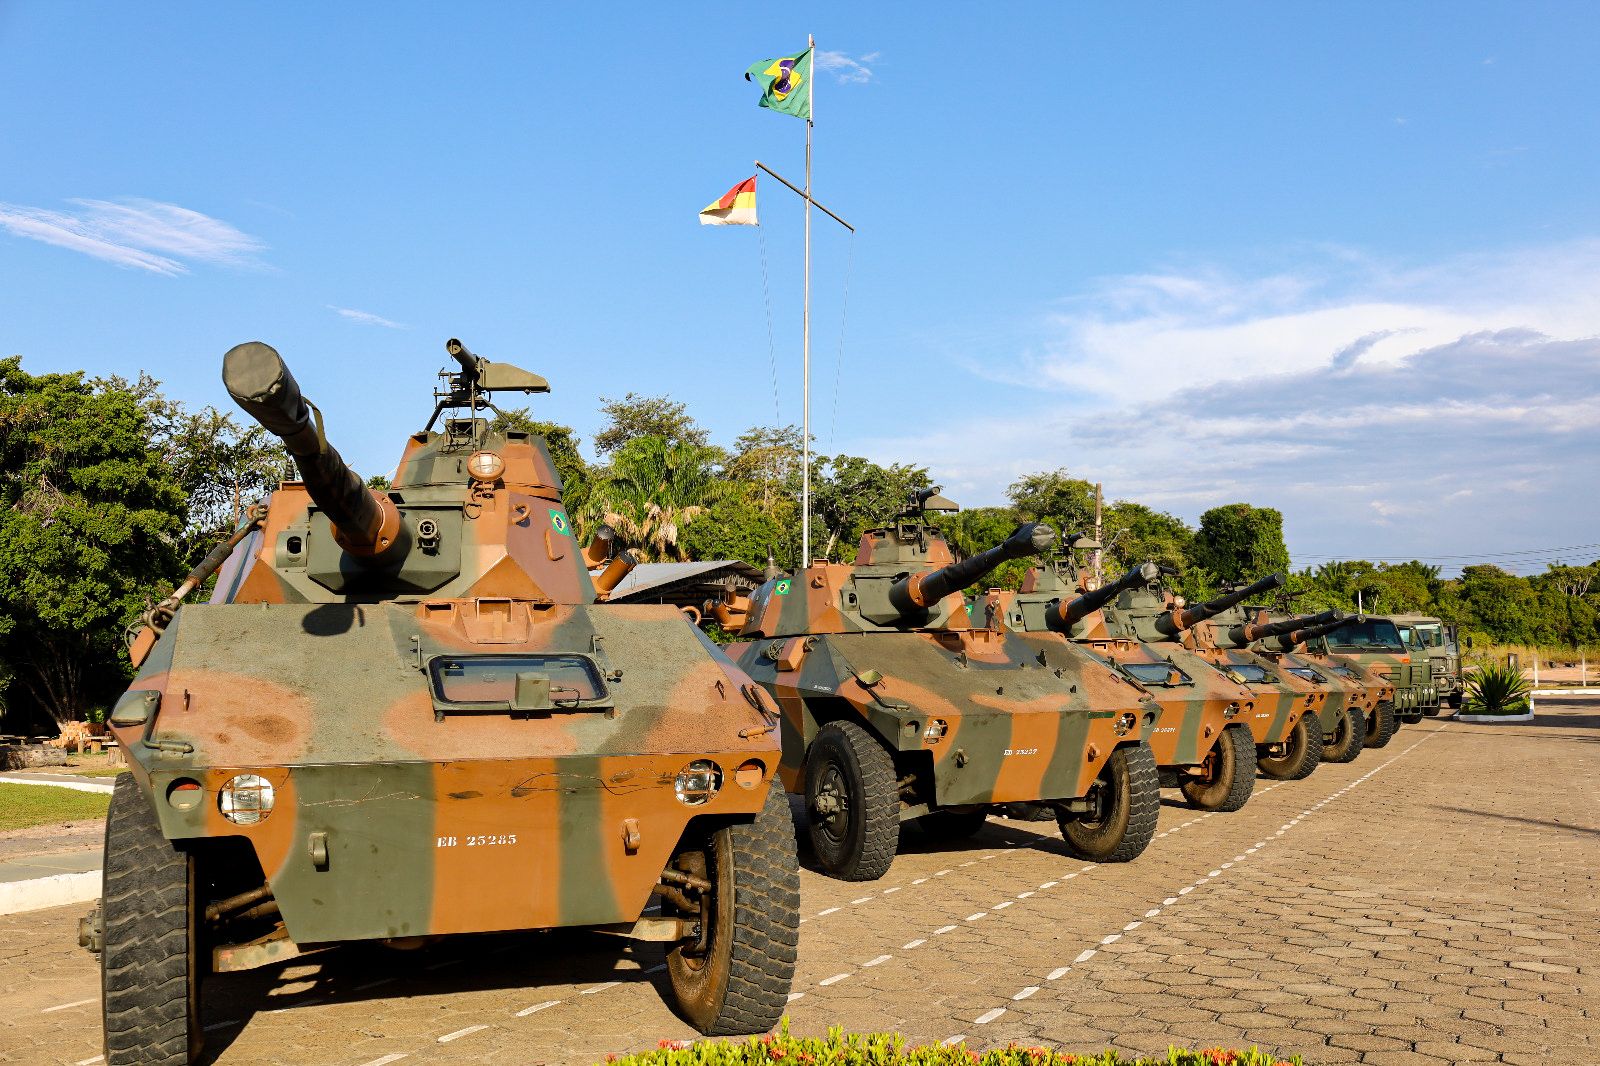 Maintenance efforts ensure operational readiness in the far north of Brazil